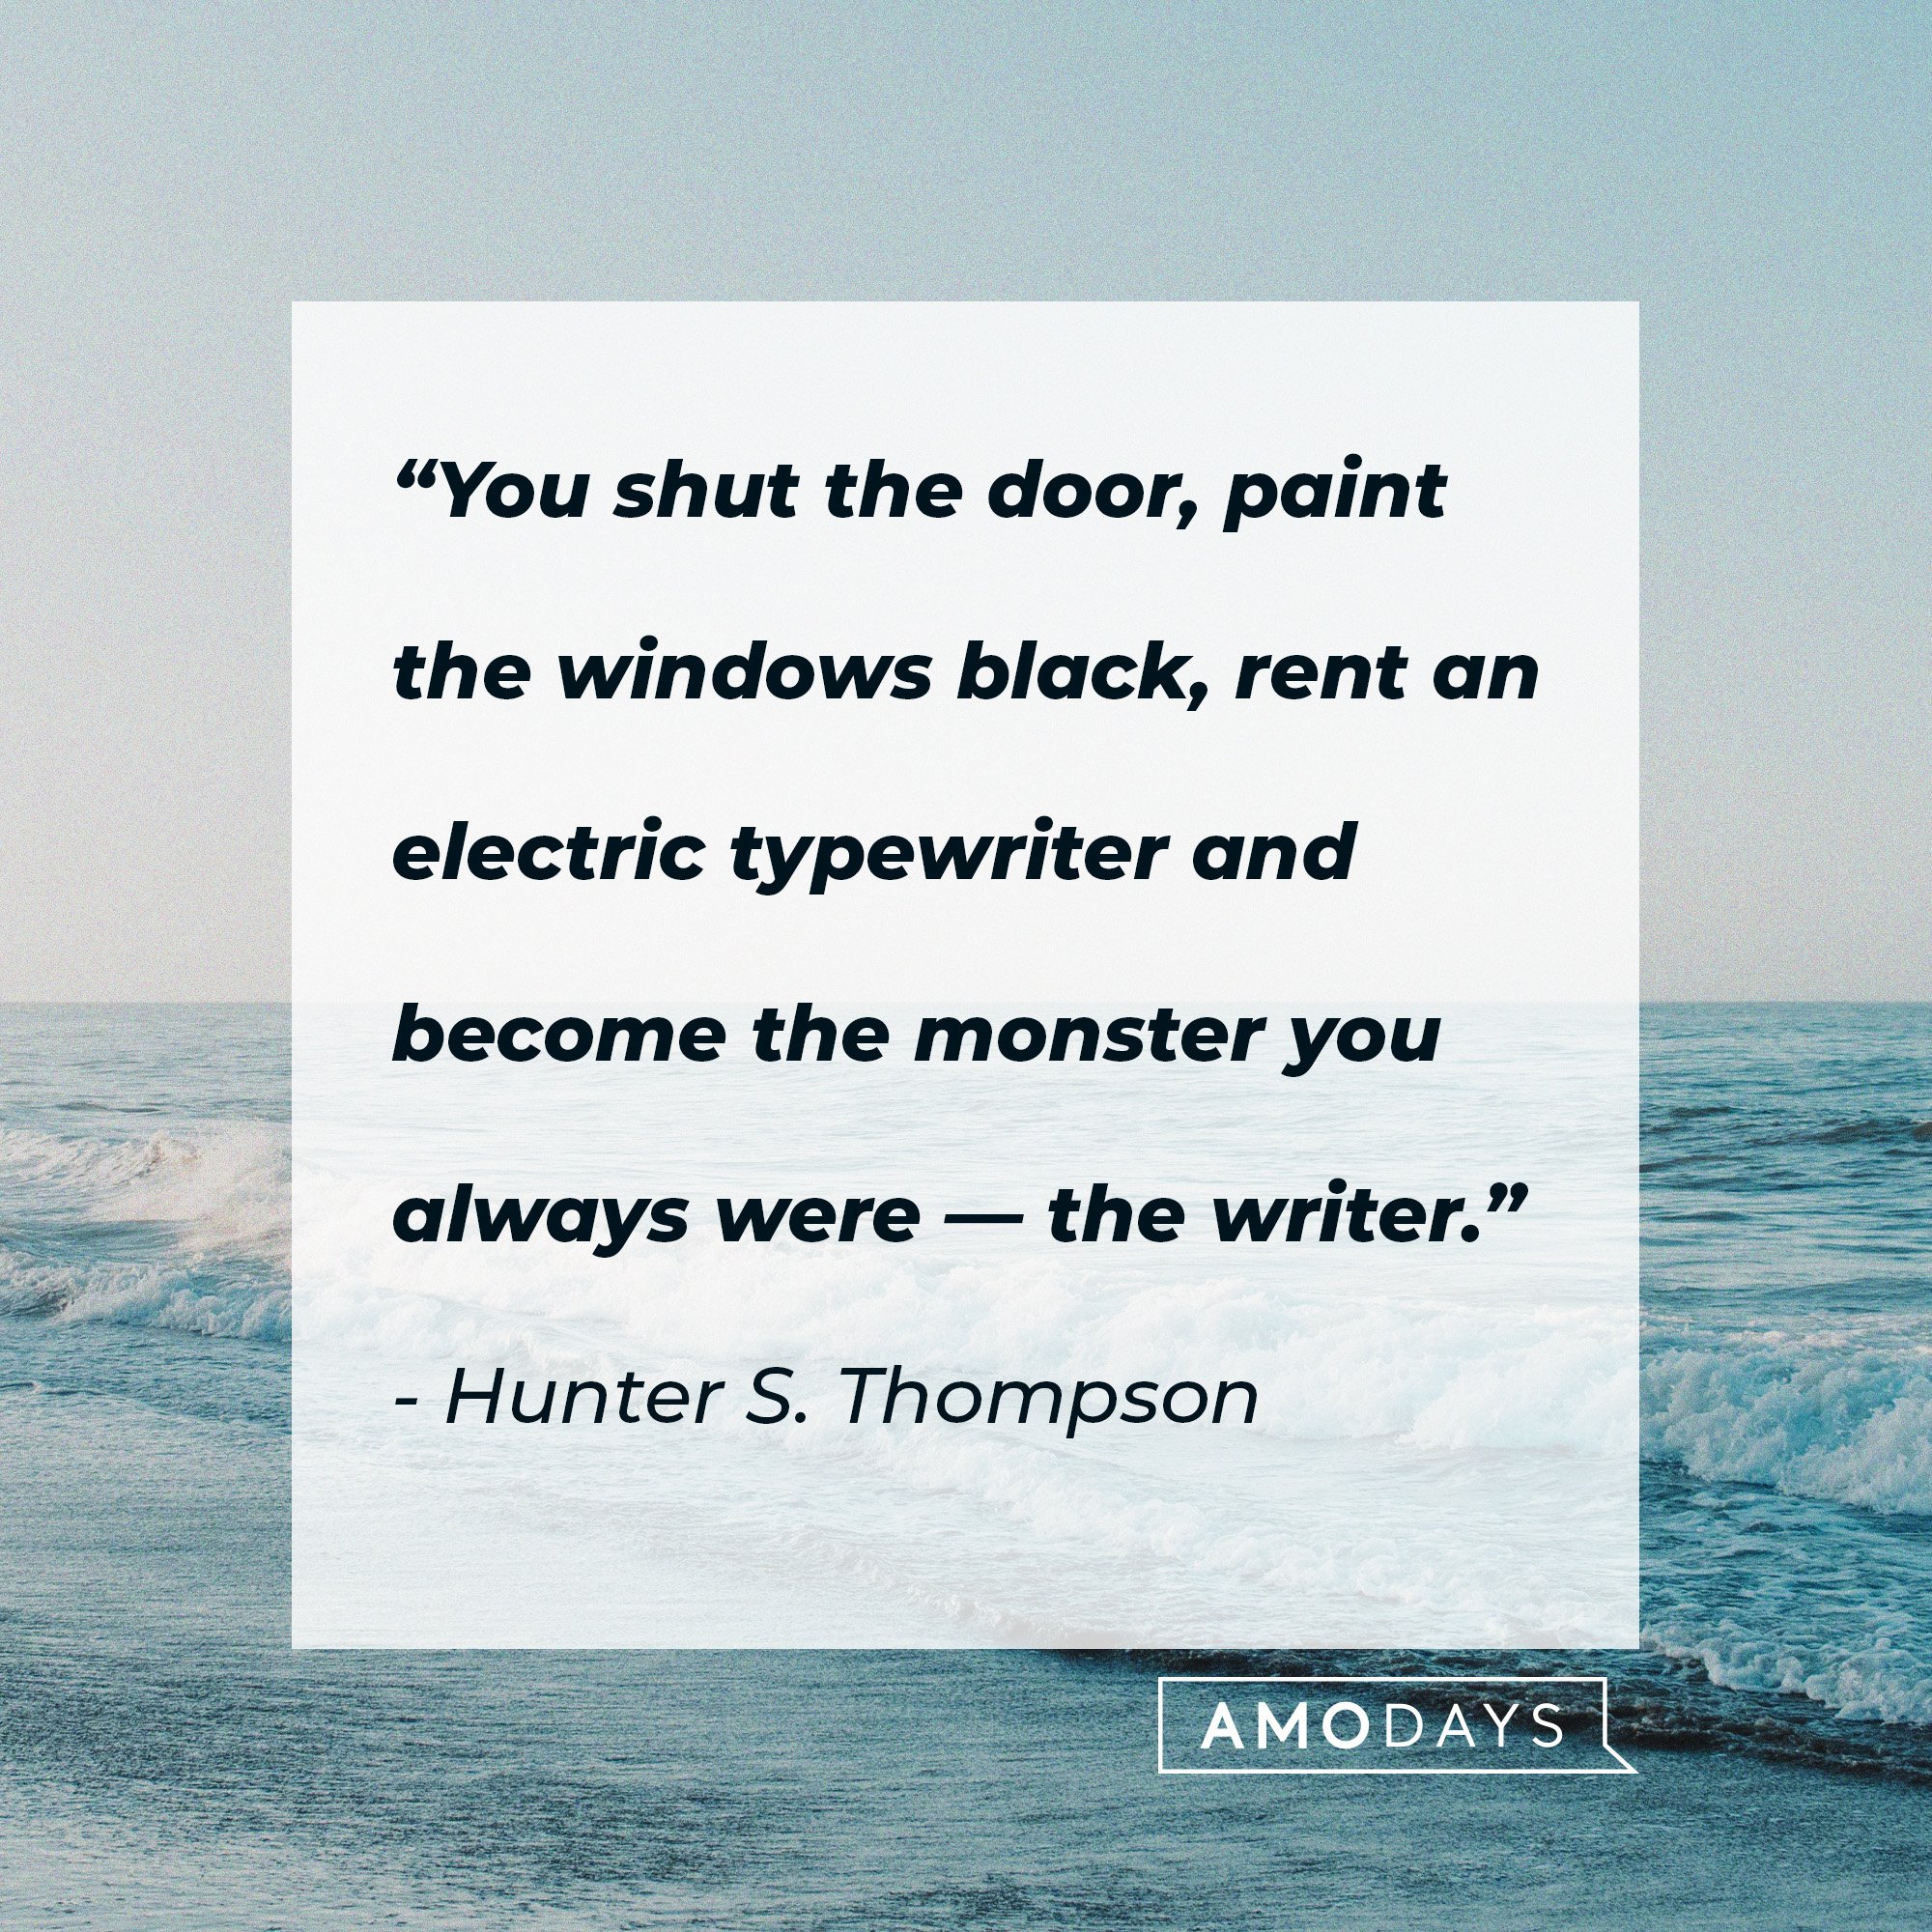 Hunter S. Thompson’s quote: “You shut the door, paint the windows black, rent an electric typewriter and become the monster you always were – the writer.” | Image: AmoDays